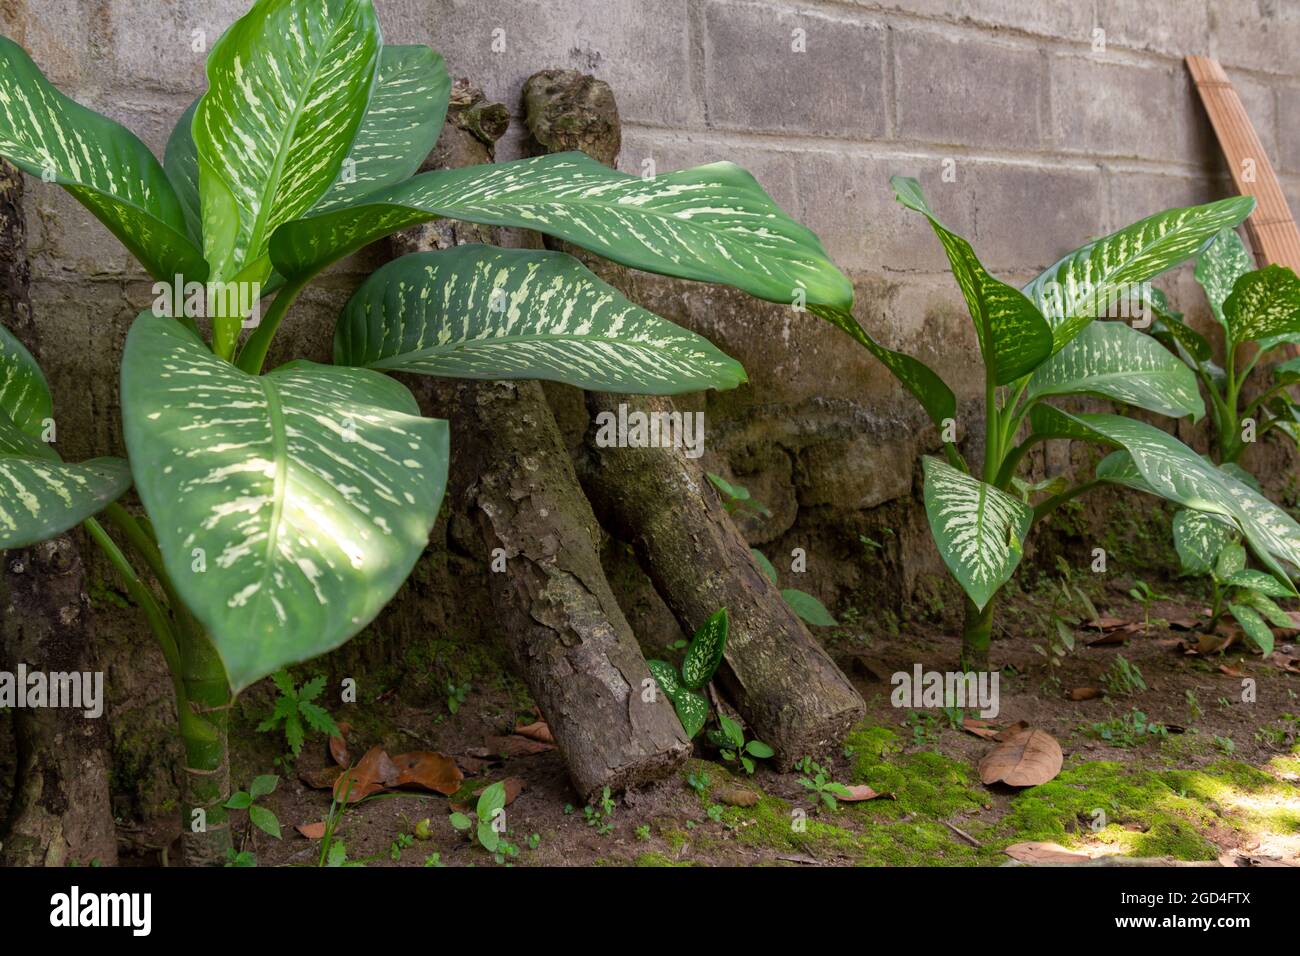 The dump cane plant grows near the wall of the house mixed with firewood Stock Photo